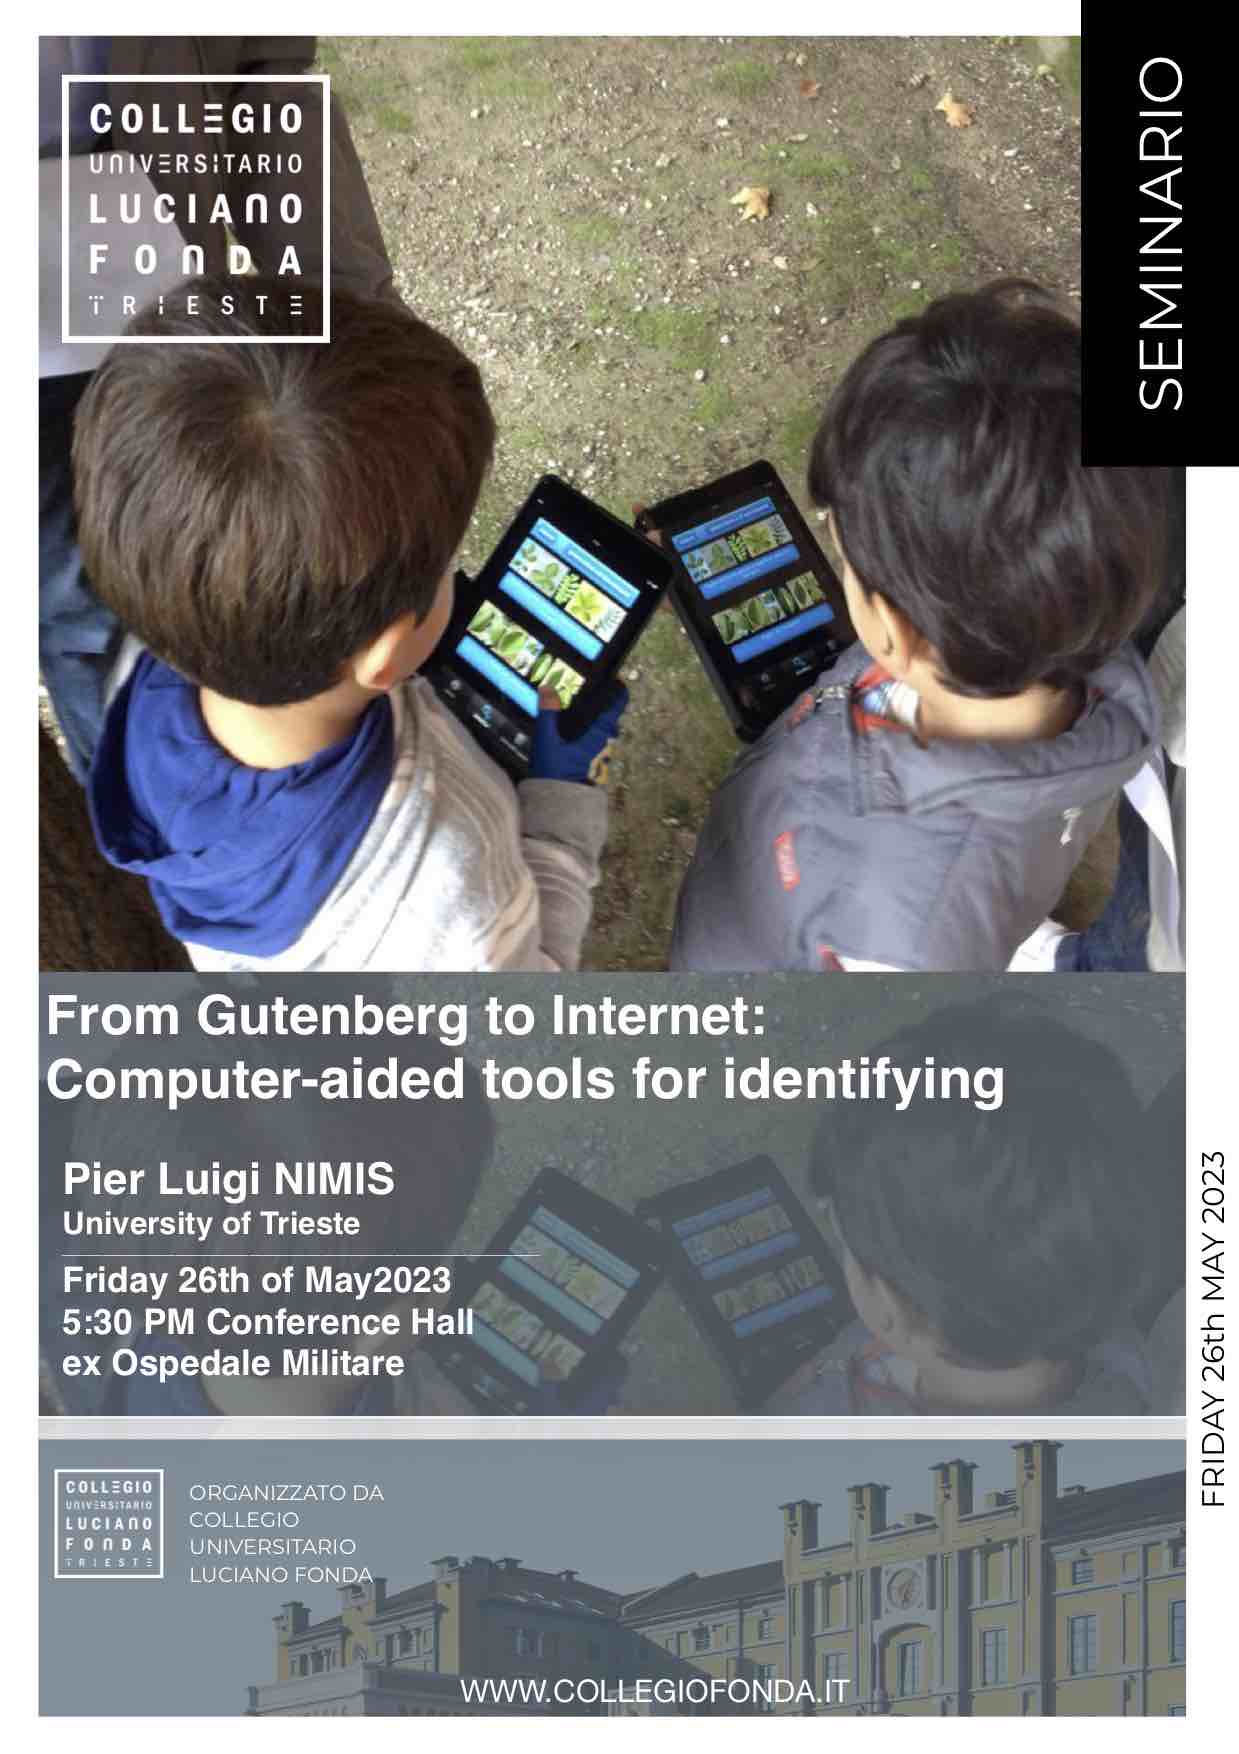 FROM GUTENBERG TO INTERNET: COMPUTER-AIDED TOOLS FOR IDENTIFYING BIODIVERSITY – Friday, 26th of May 2023 – Seminar by Pier Luigi Nimis